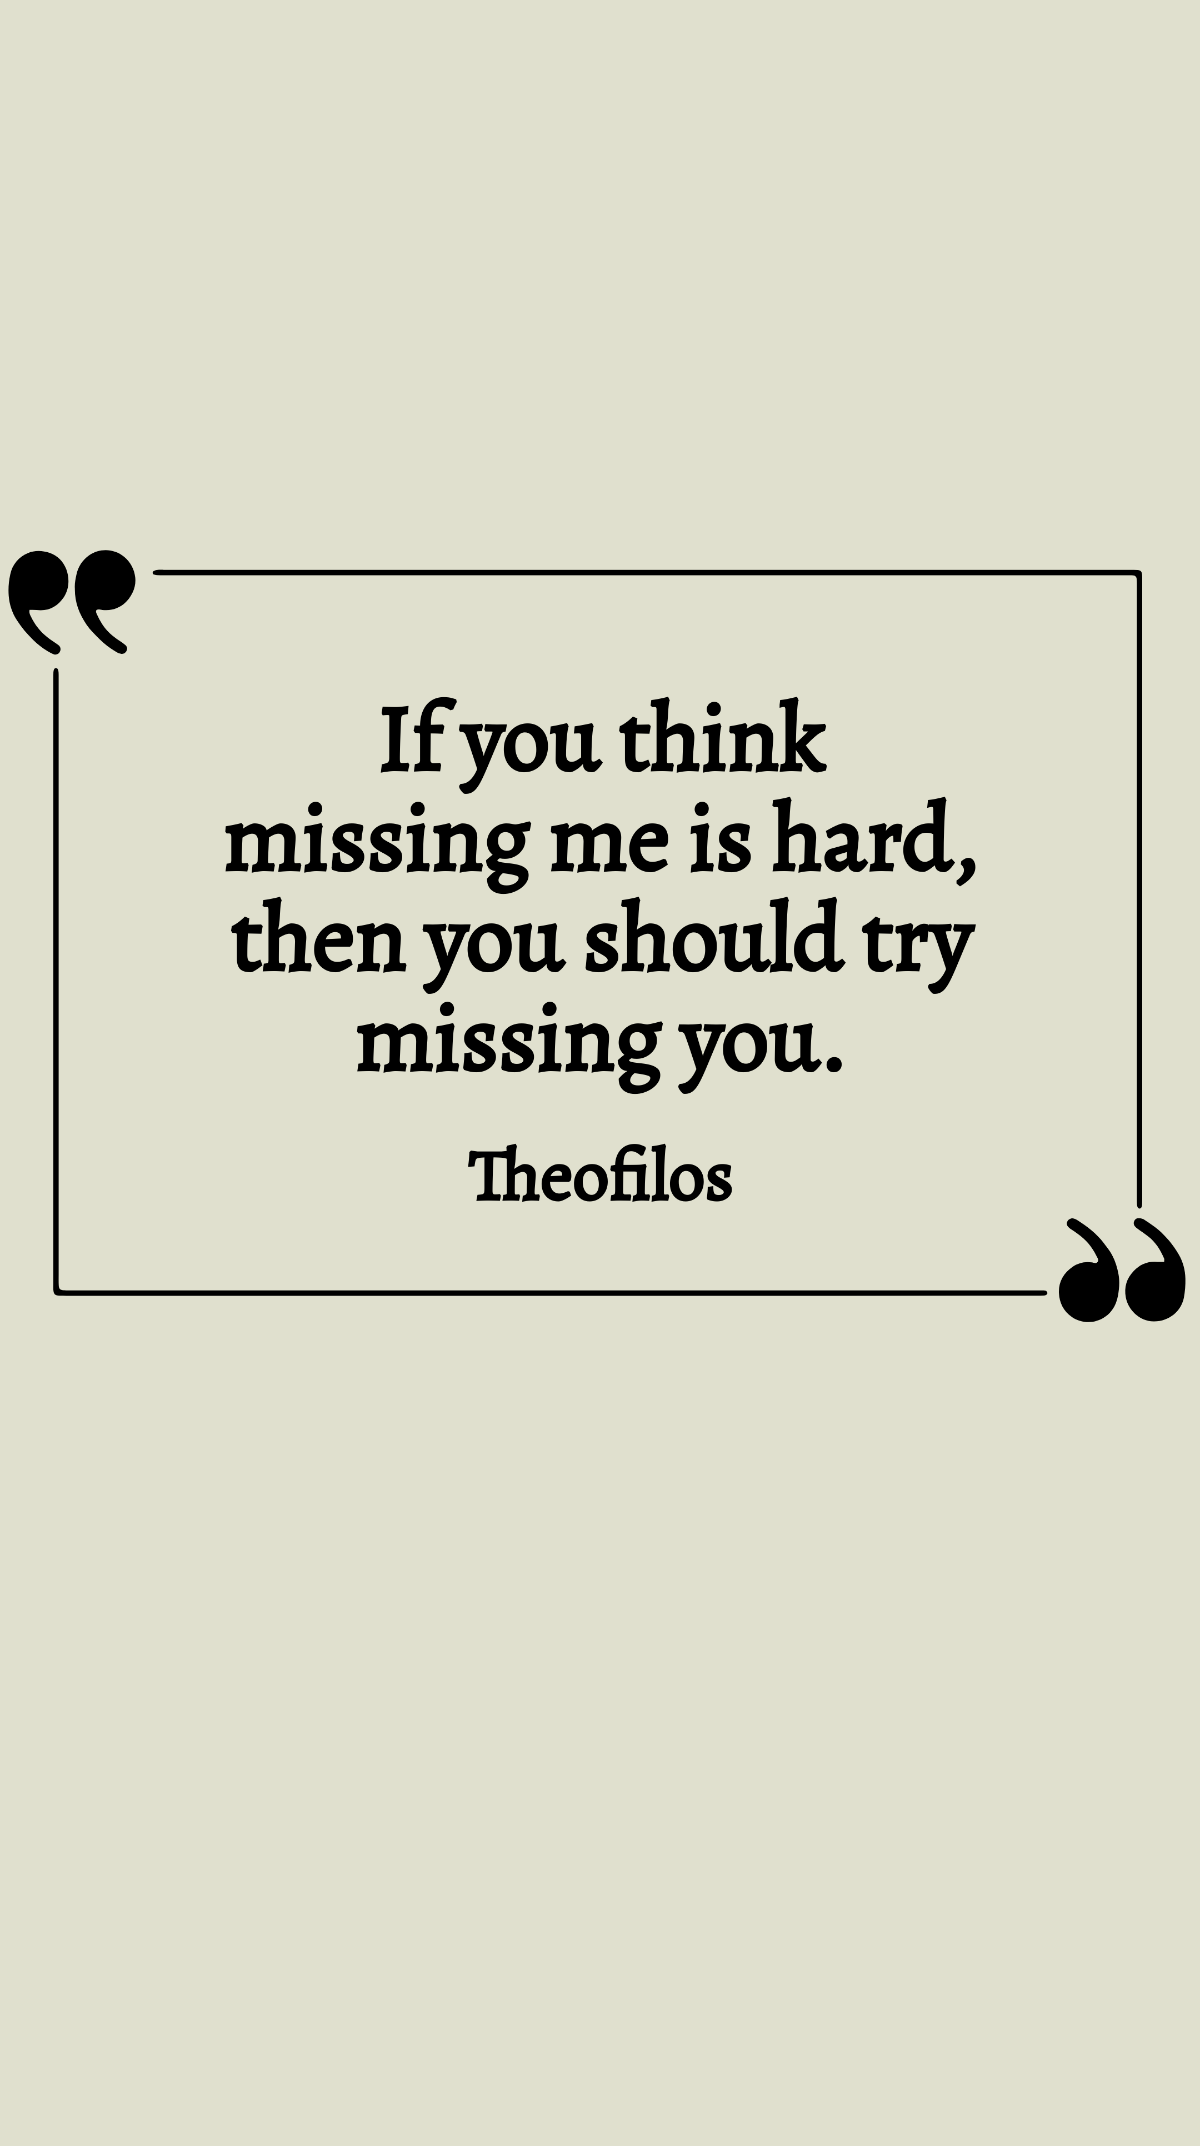 Theofilos - If you think missing me is hard, then you should try missing you. Template